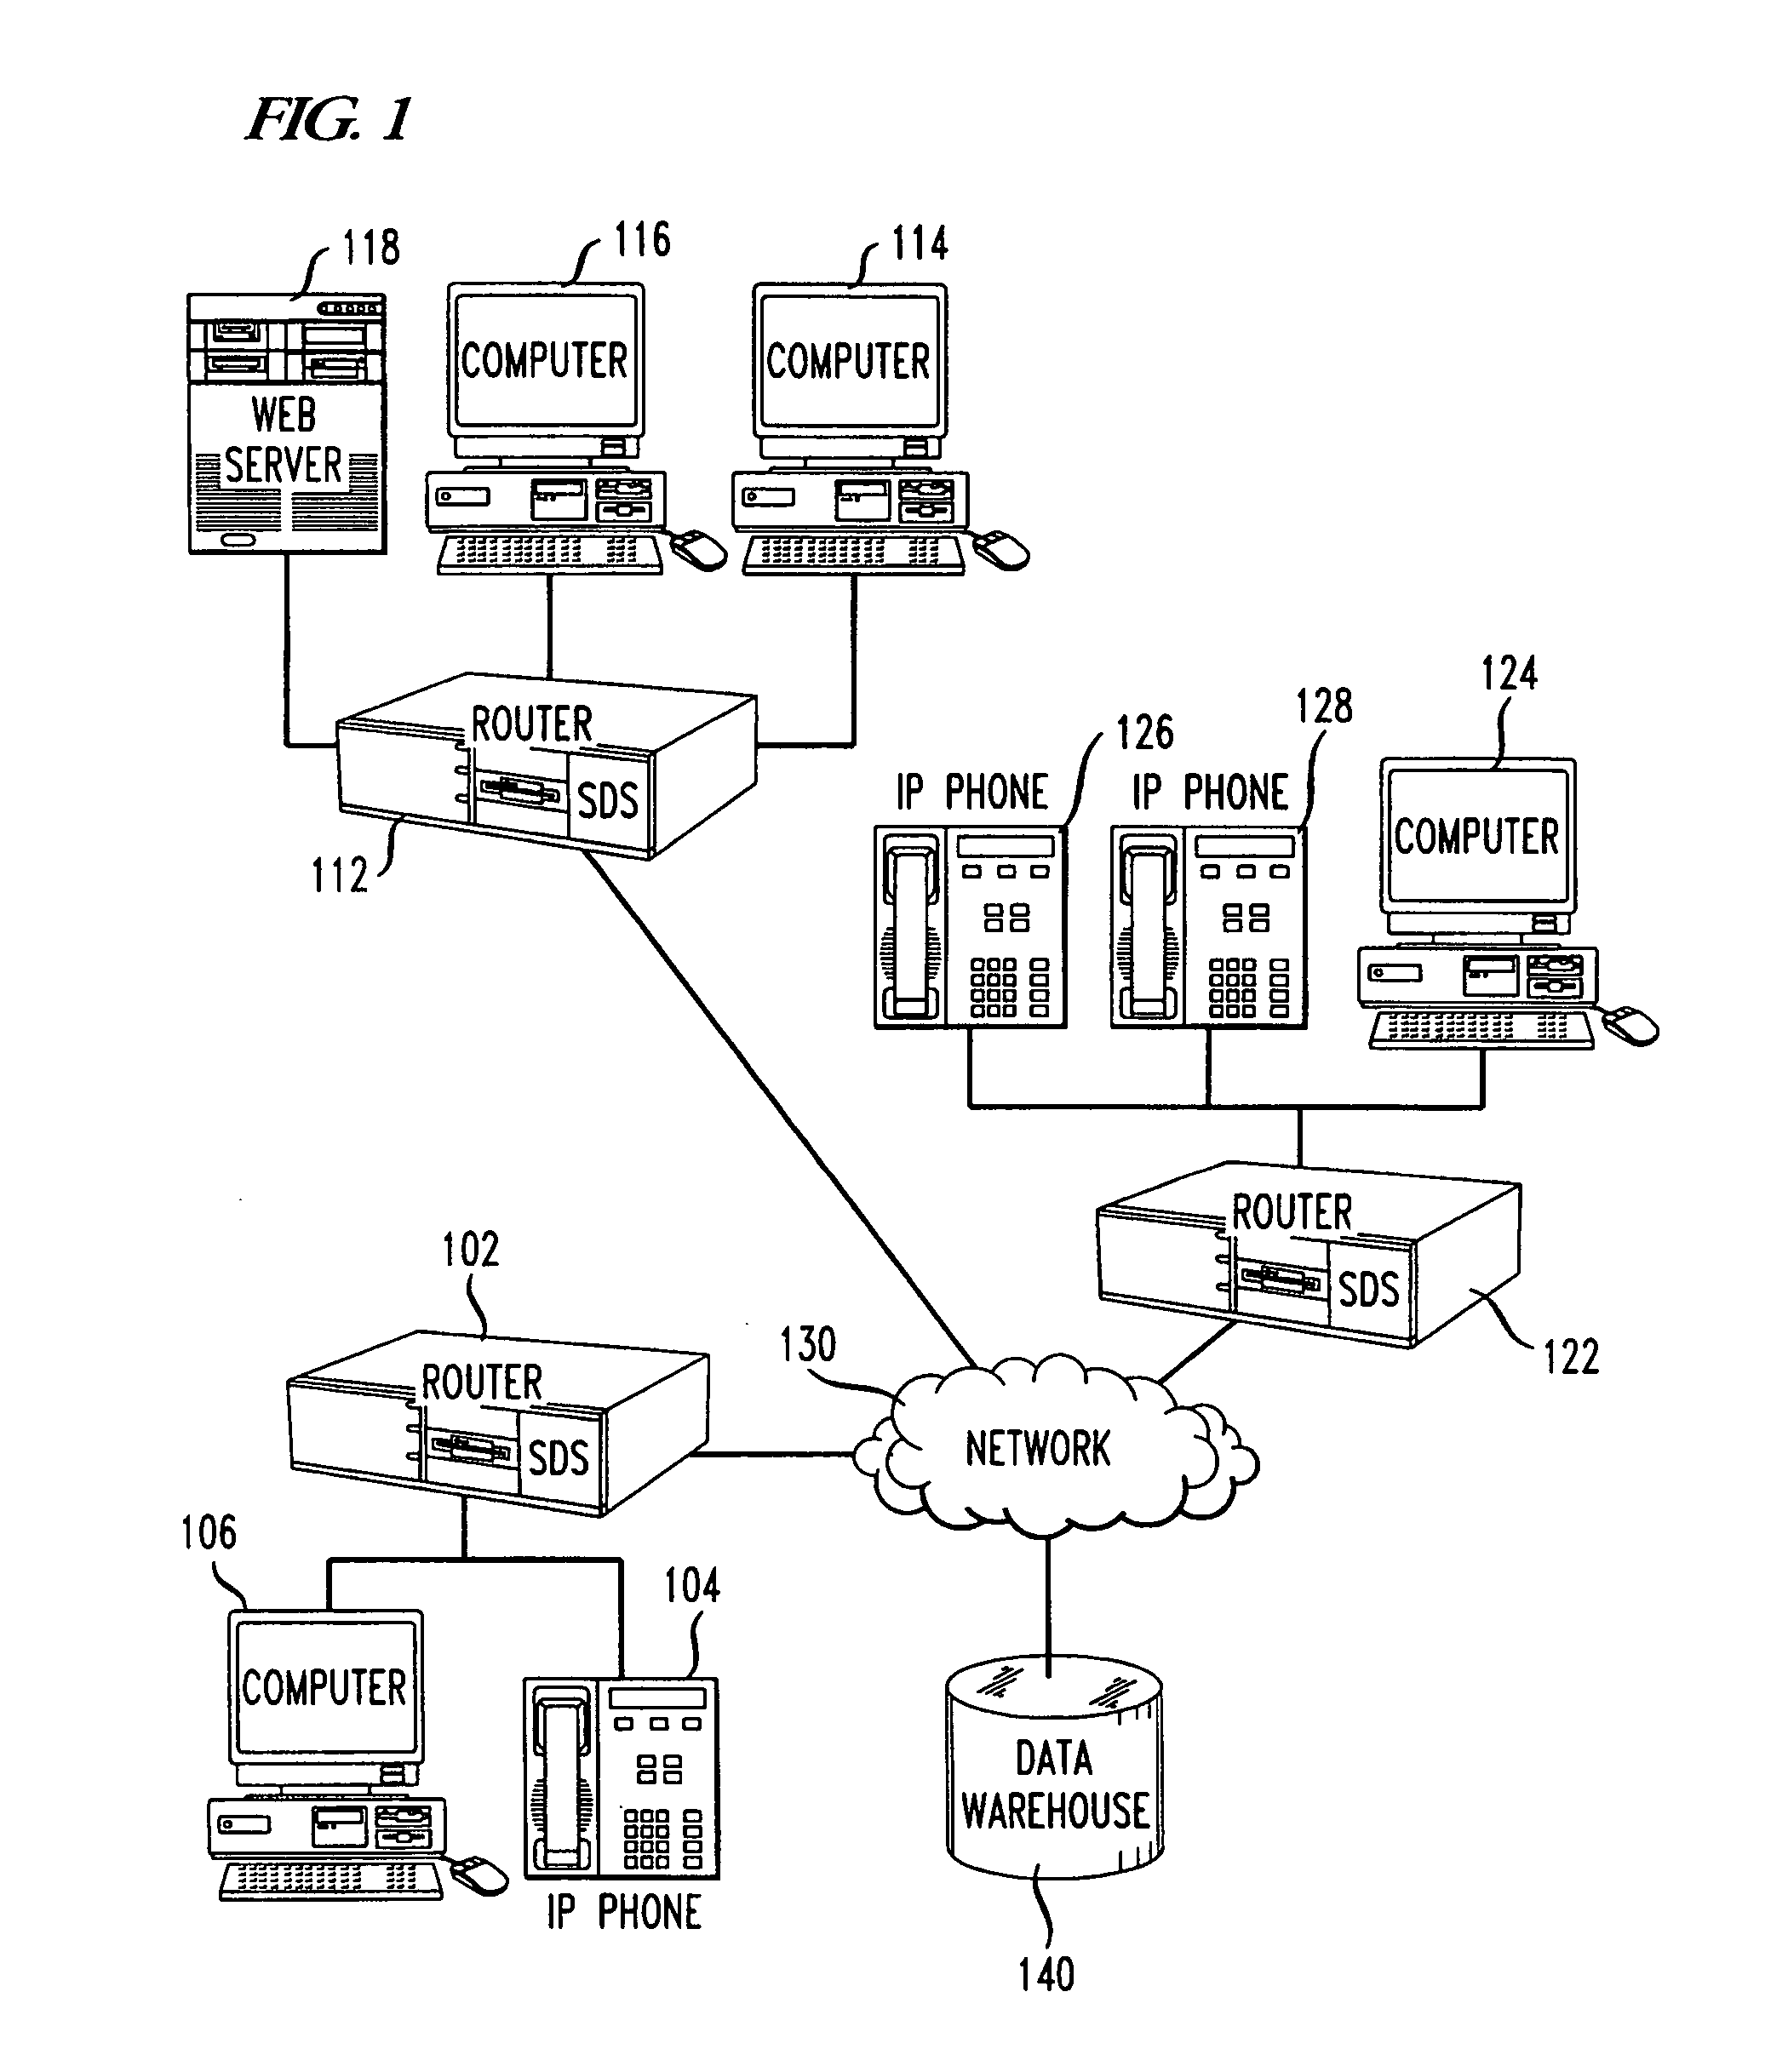 Method and apparatus for using histograms to produce data summaries